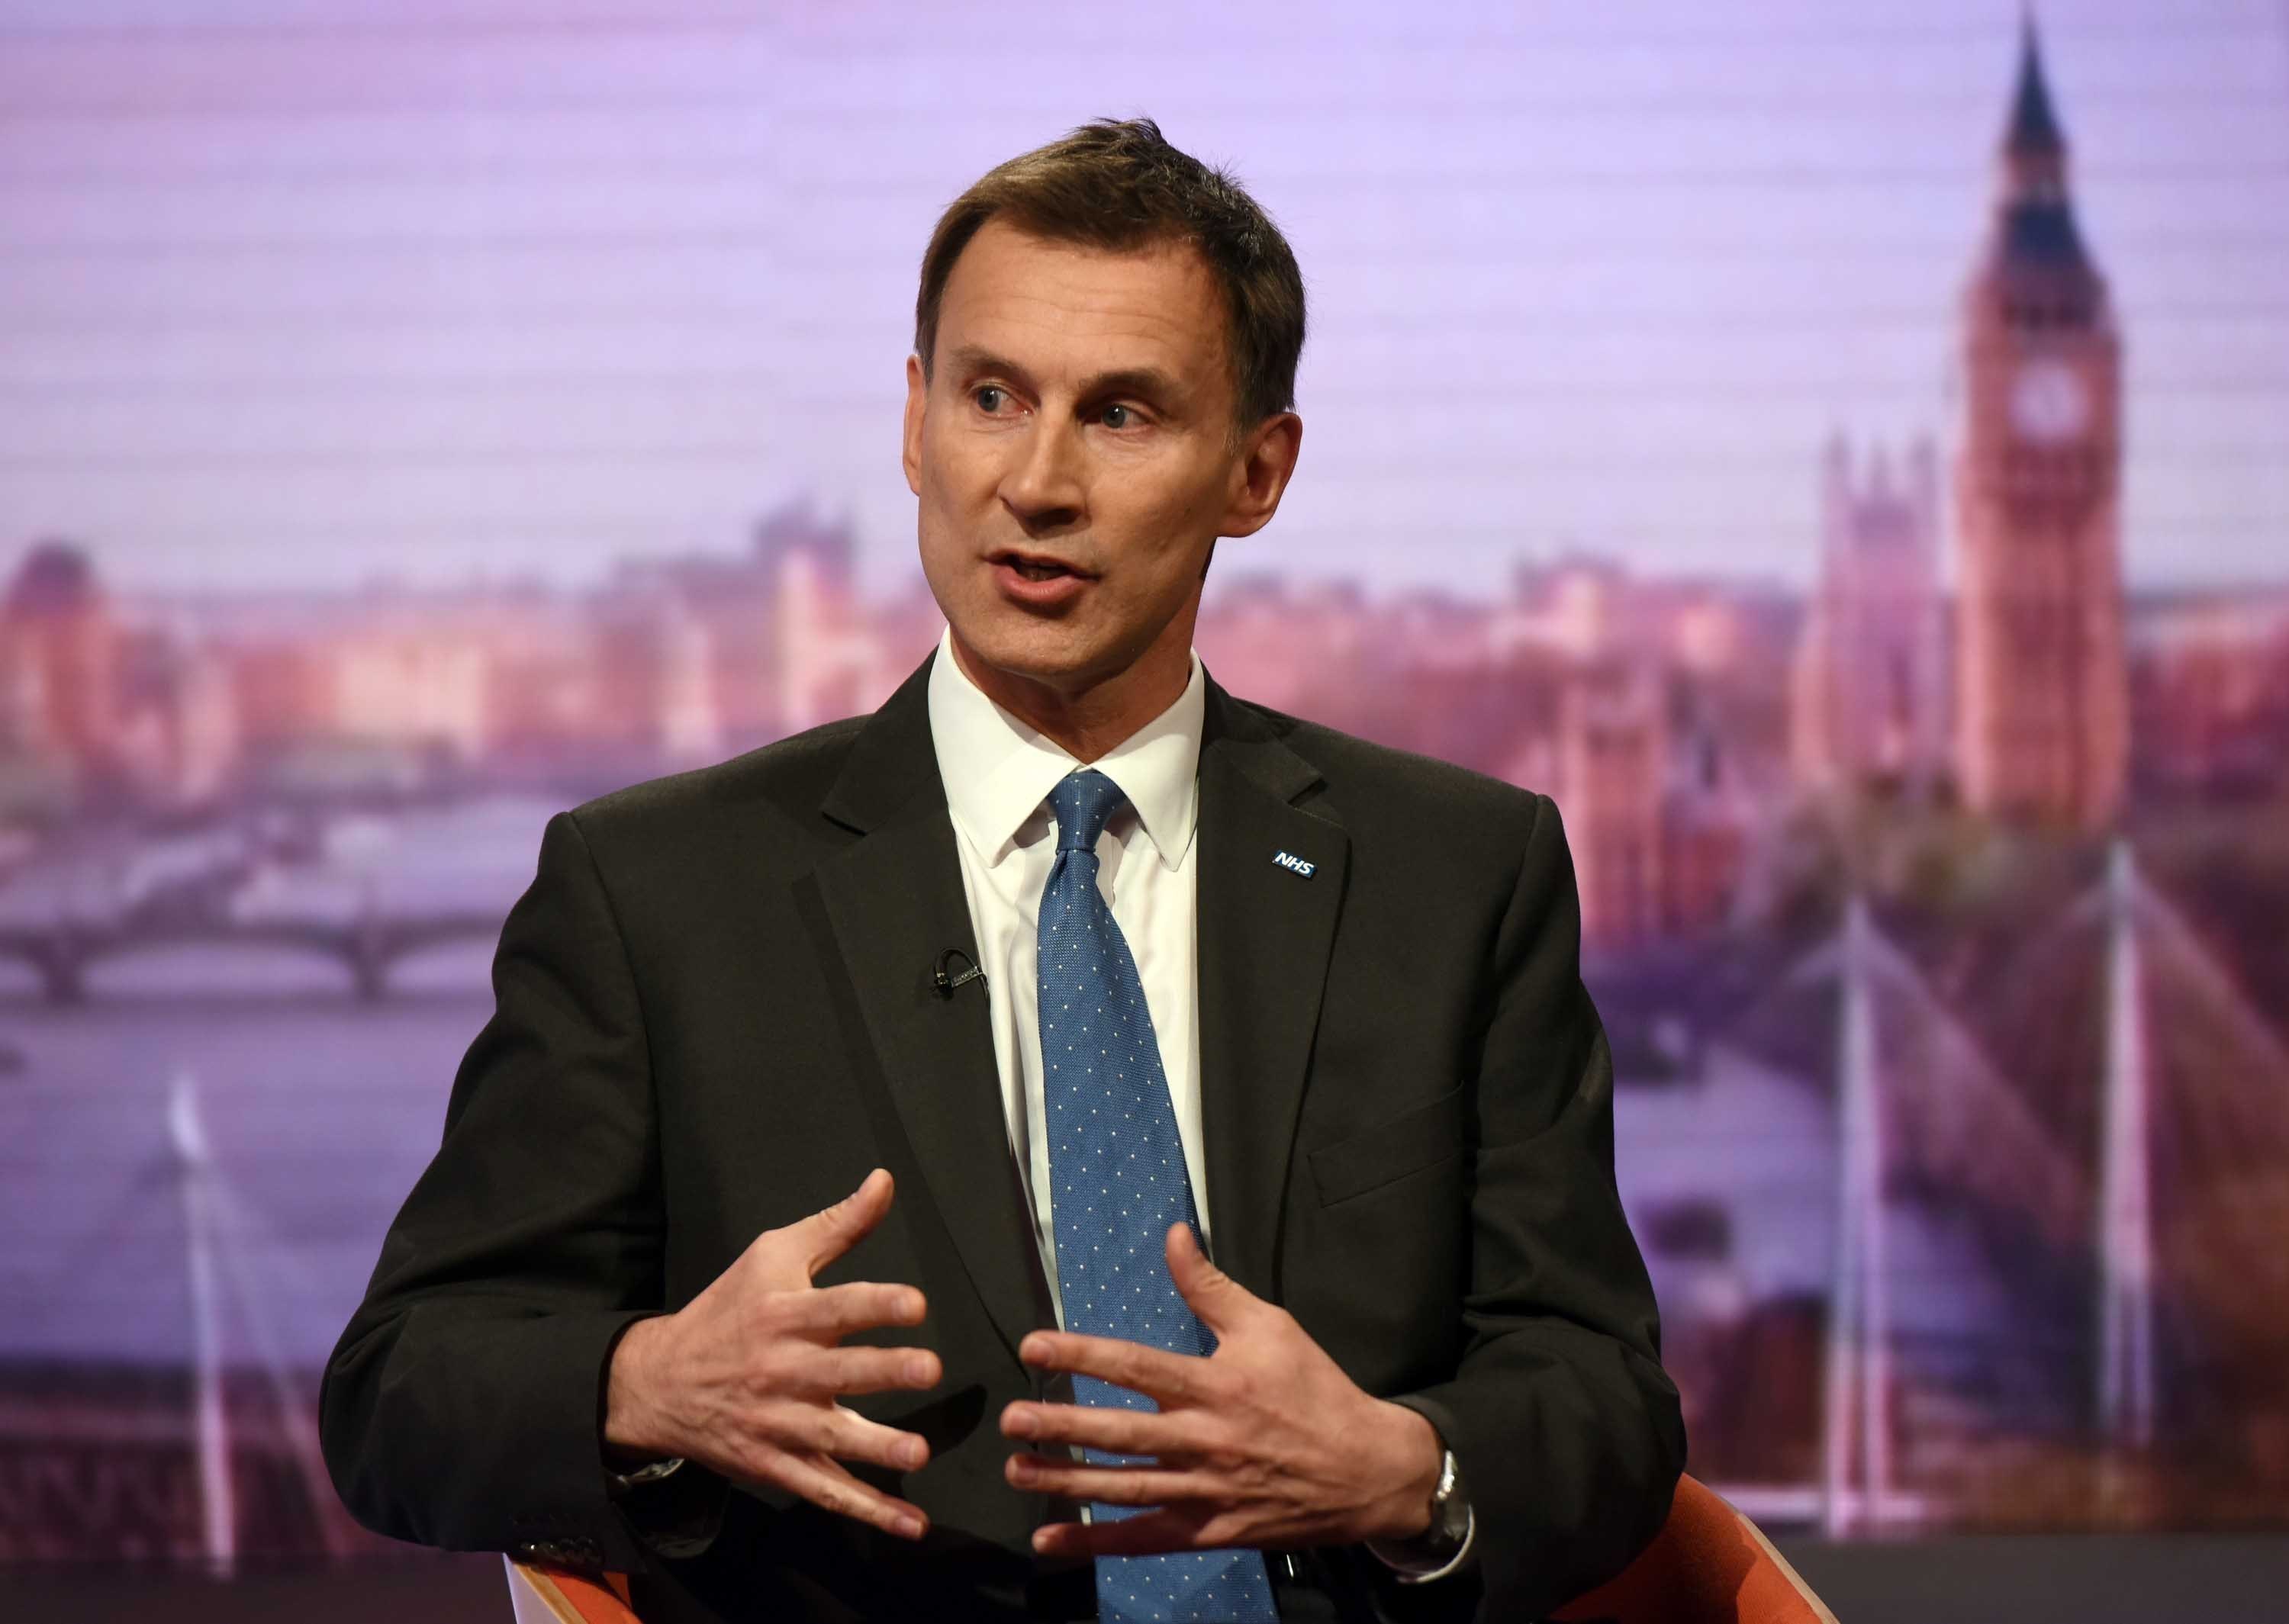 Health Secretary Jeremy Hunt appearing on the BBC One current affairs programme, The Andrew Marr Show.